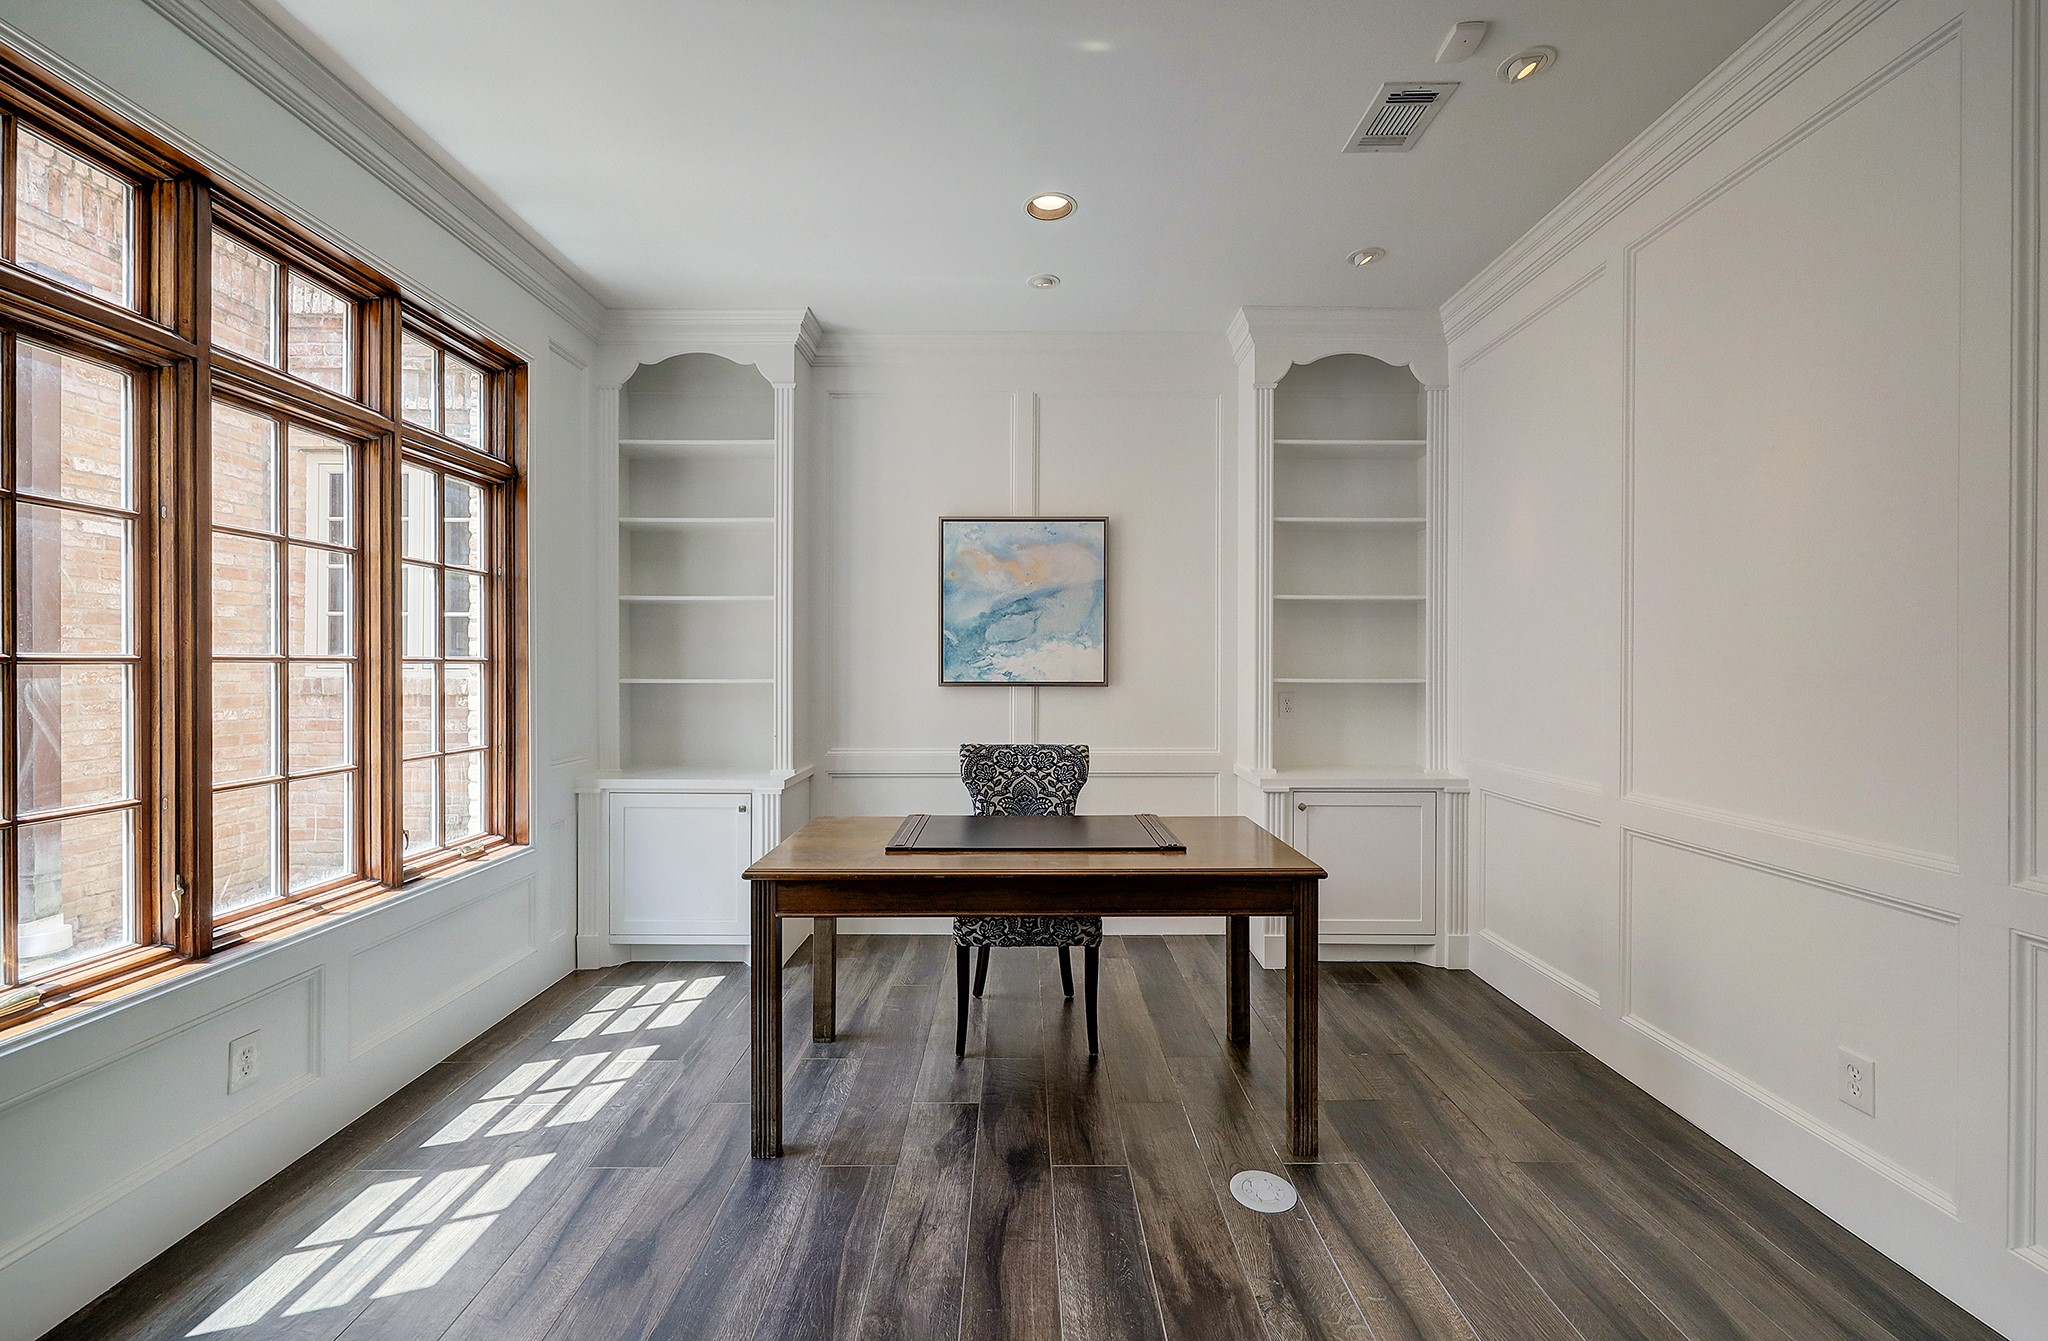 Study has custom built-ins, wall panel moulding and a wall of large windows.